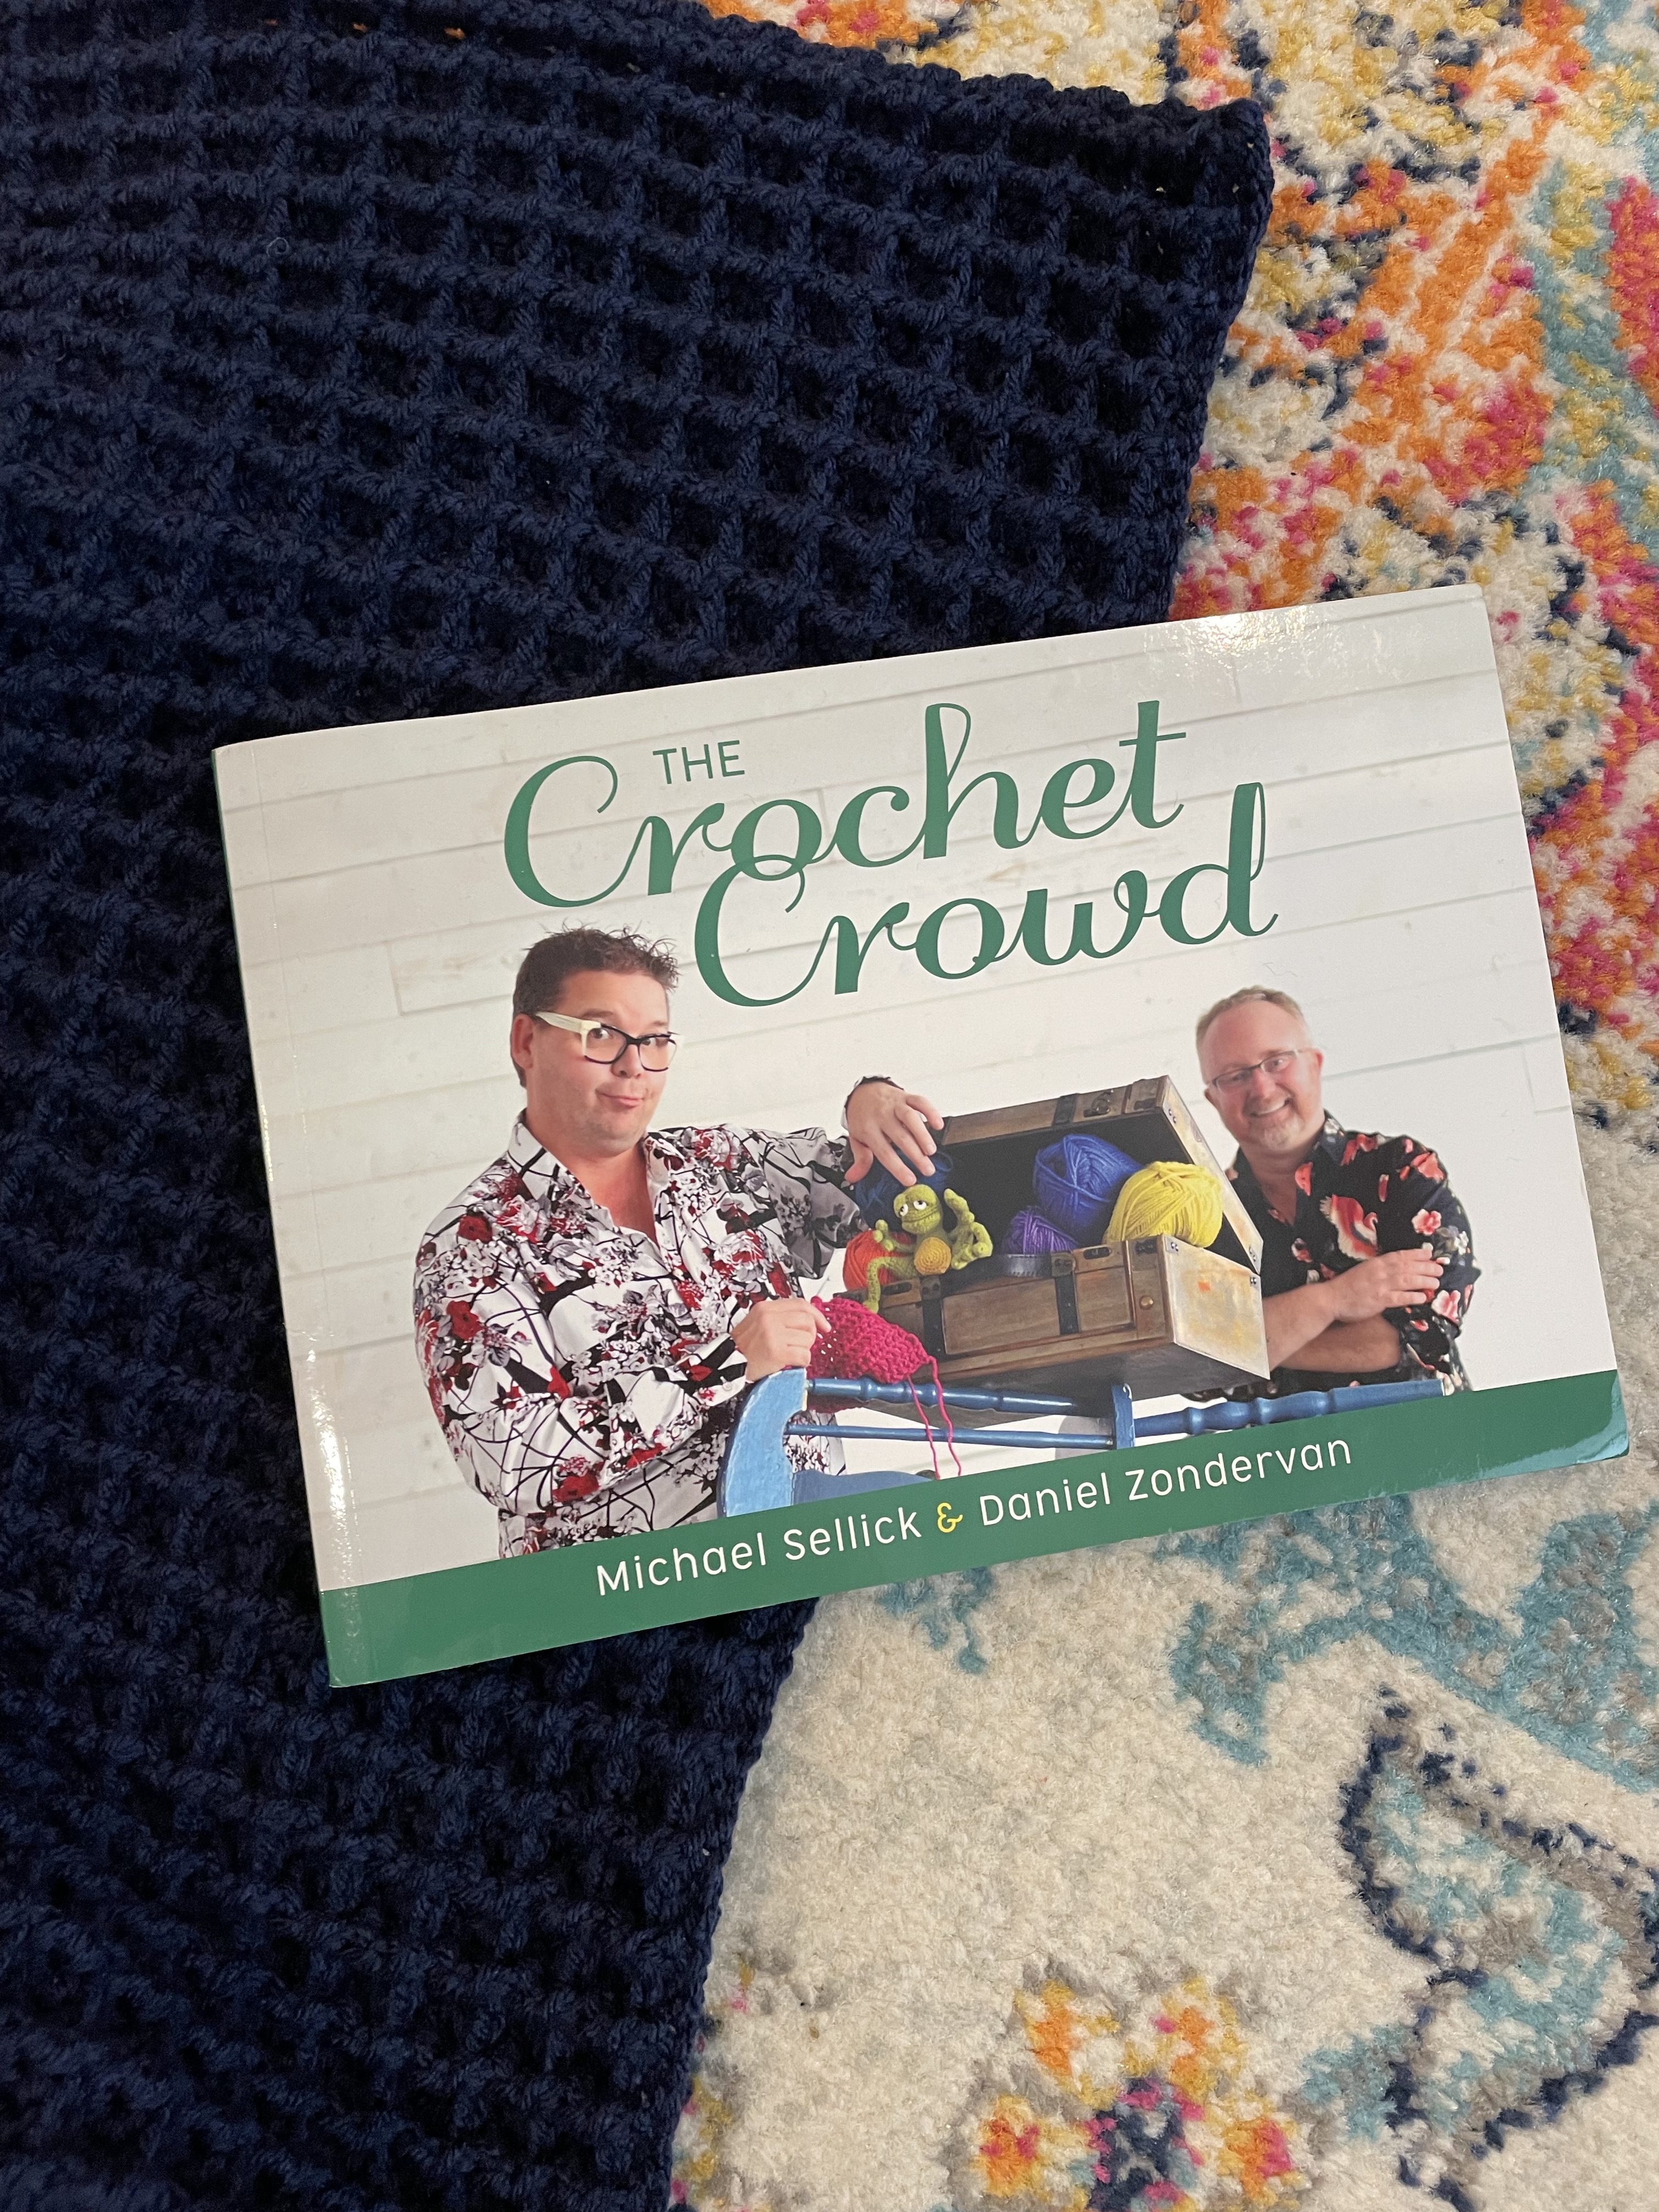 The Crochet Crowd’s New Book